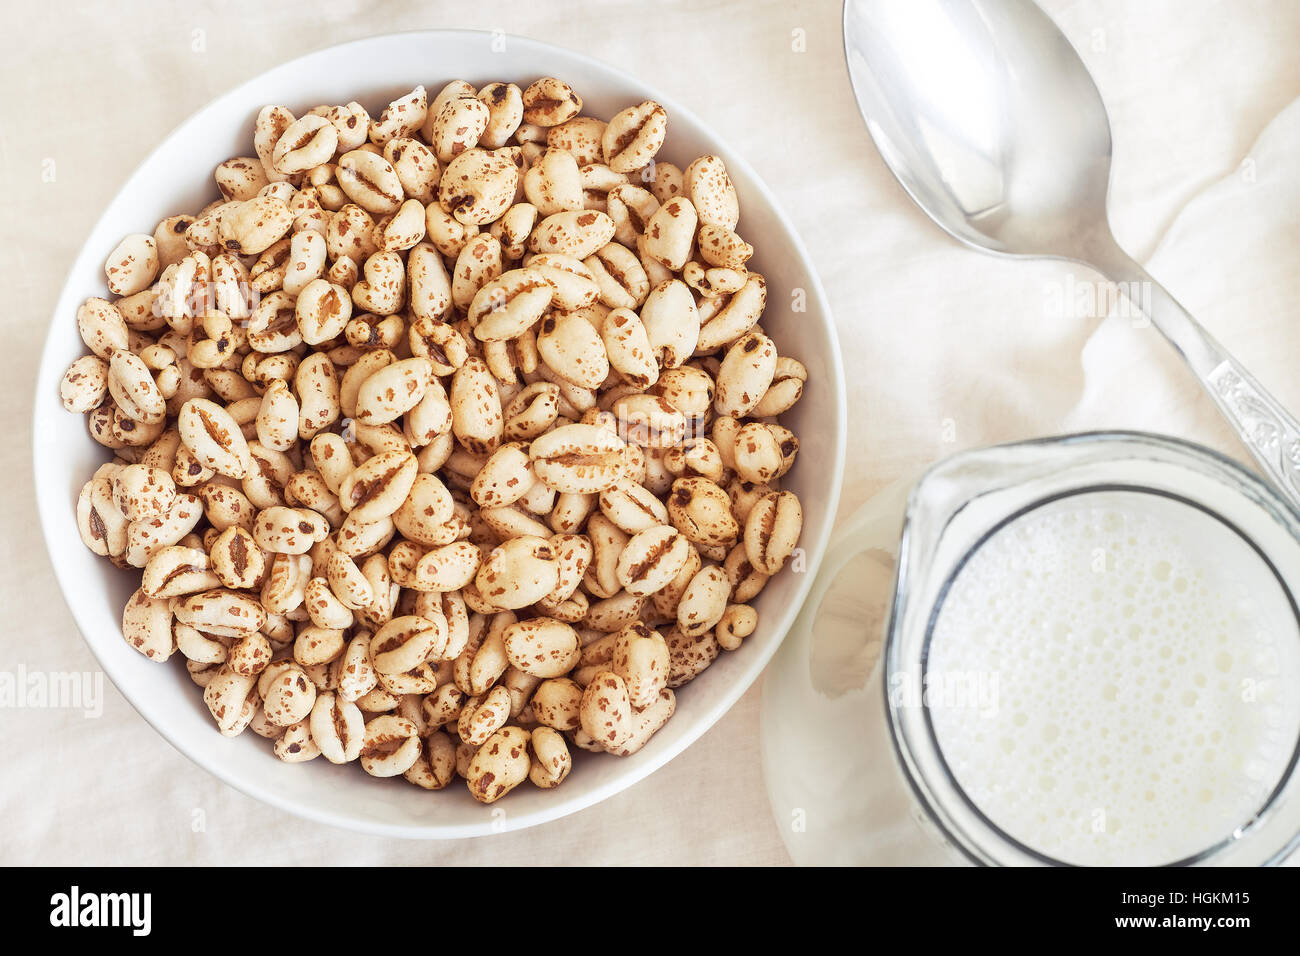 Puffed wheat cereal in white bowl with pitcher of milk and spoon. Top view Stock Photo